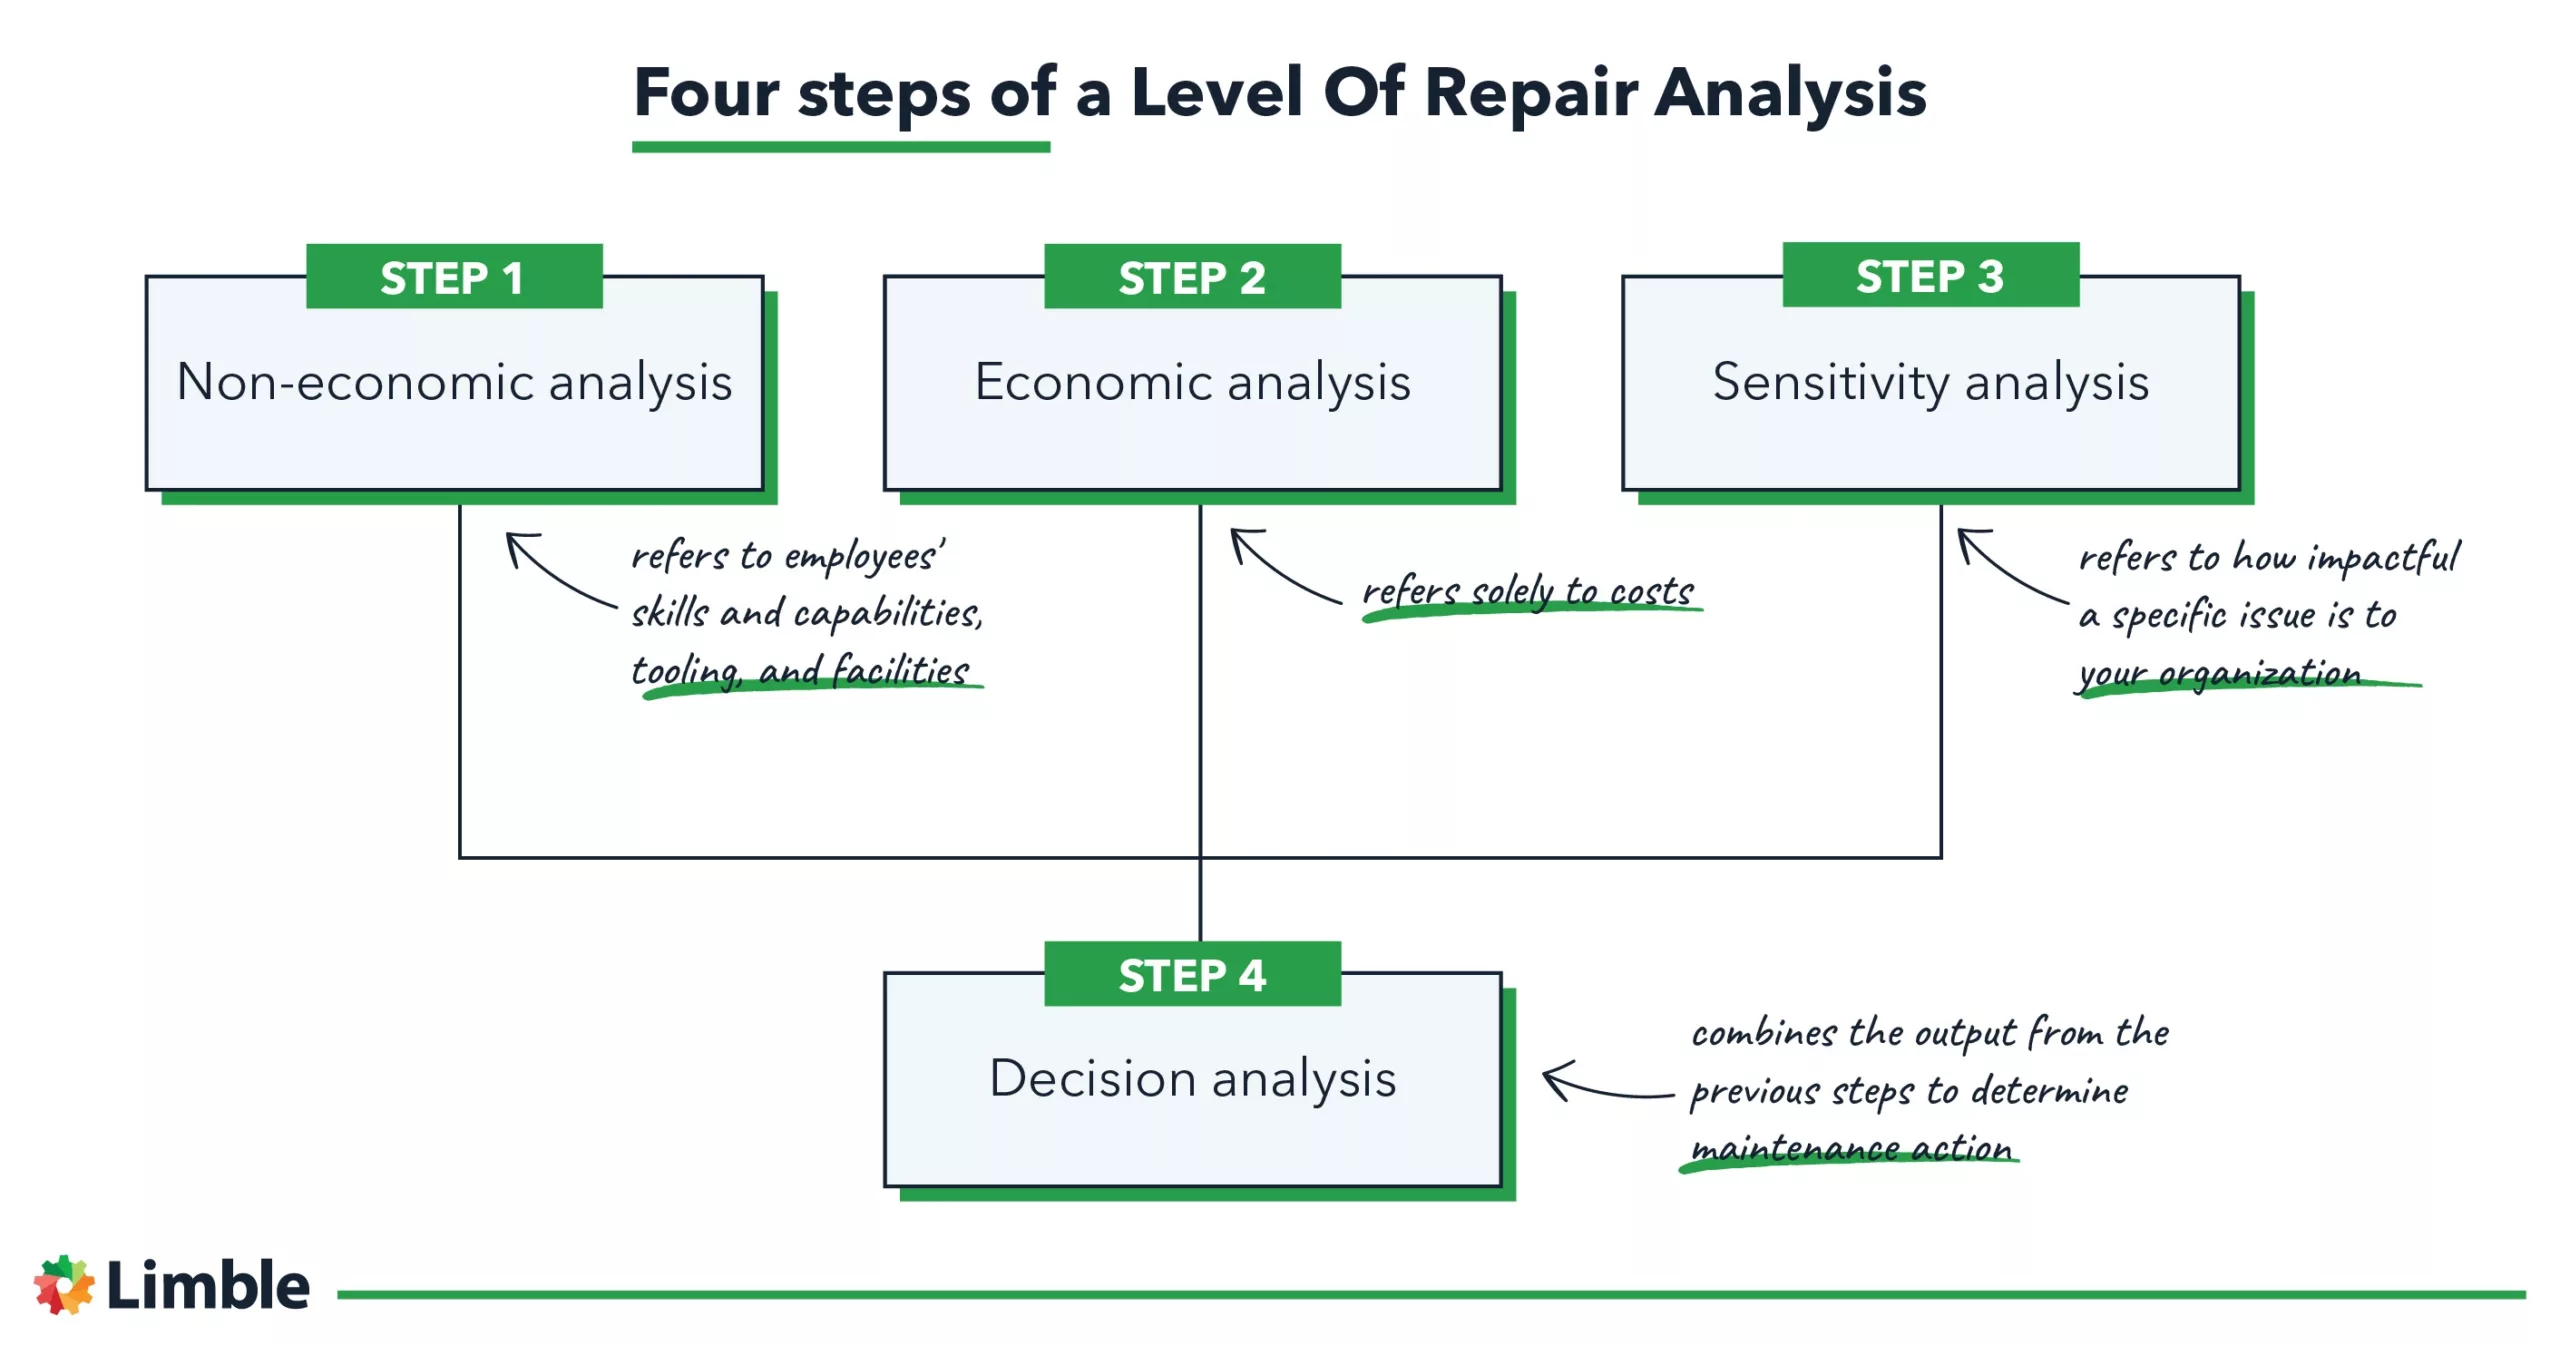 Fours steps of a level of repair analysis (LORA)